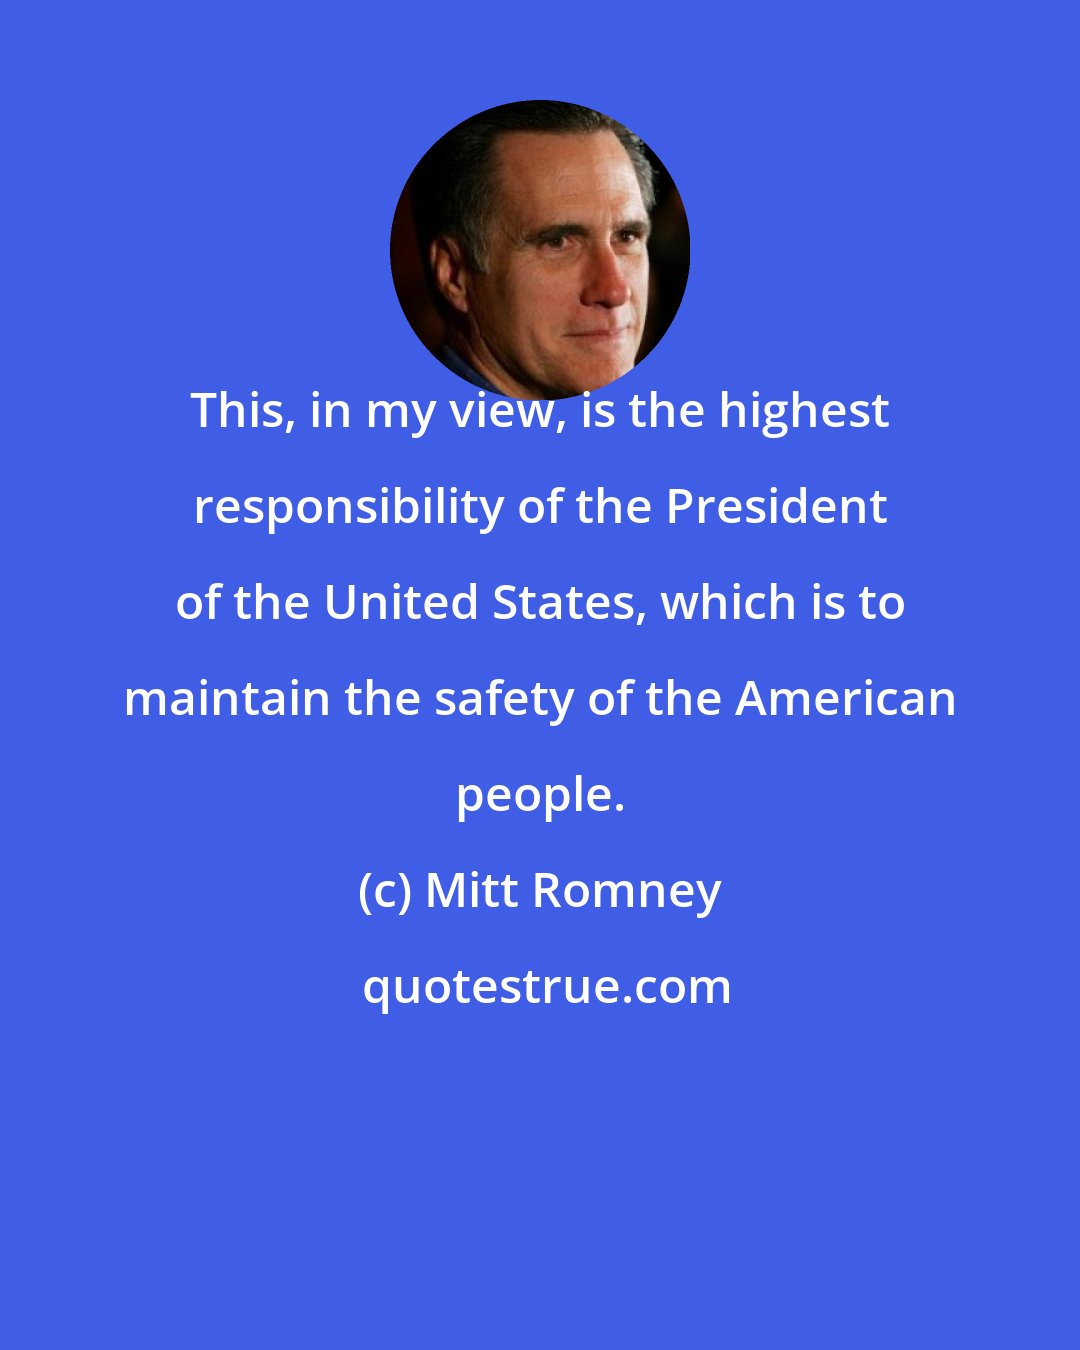 Mitt Romney: This, in my view, is the highest responsibility of the President of the United States, which is to maintain the safety of the American people.